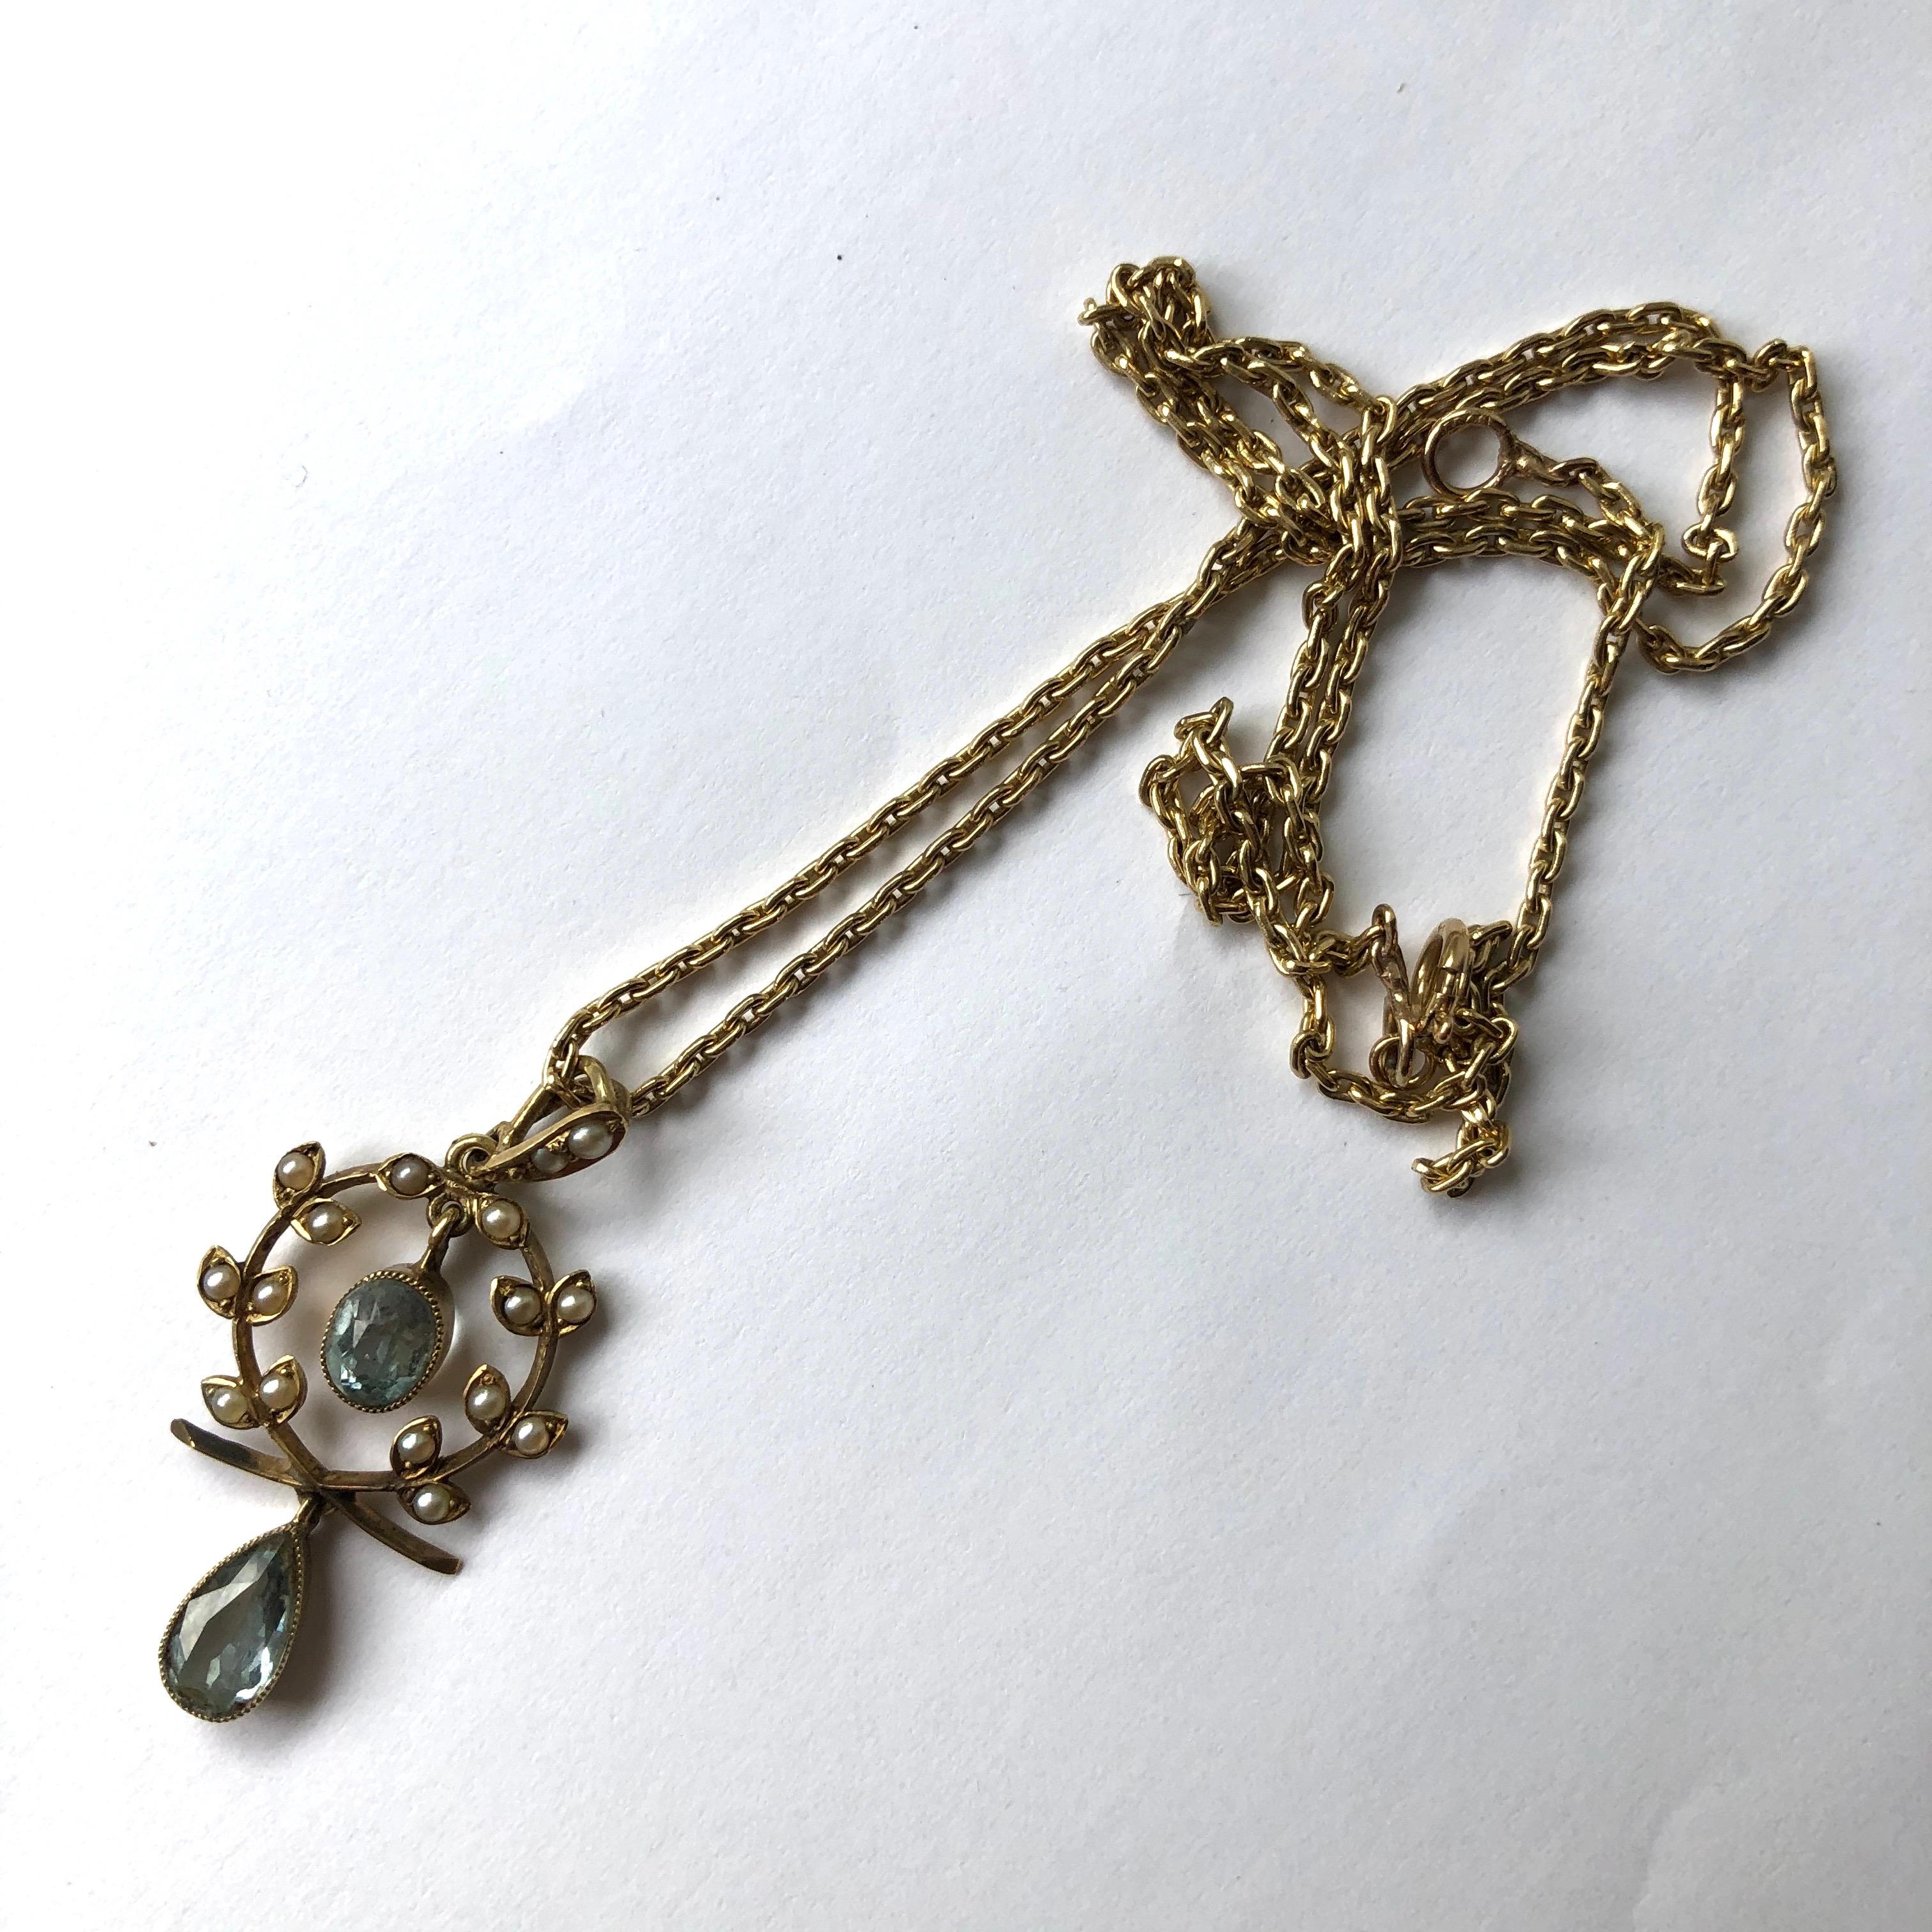 This sweet necklace holds two gorgeous pale blue aqua stones. One is a pear drop shape and one is an oval cut. Around the free hanging oval stone is a delicate halo of seed pearls set on leaves. 

Length: 43cm
Drop From Loop: 35mm
Pendant